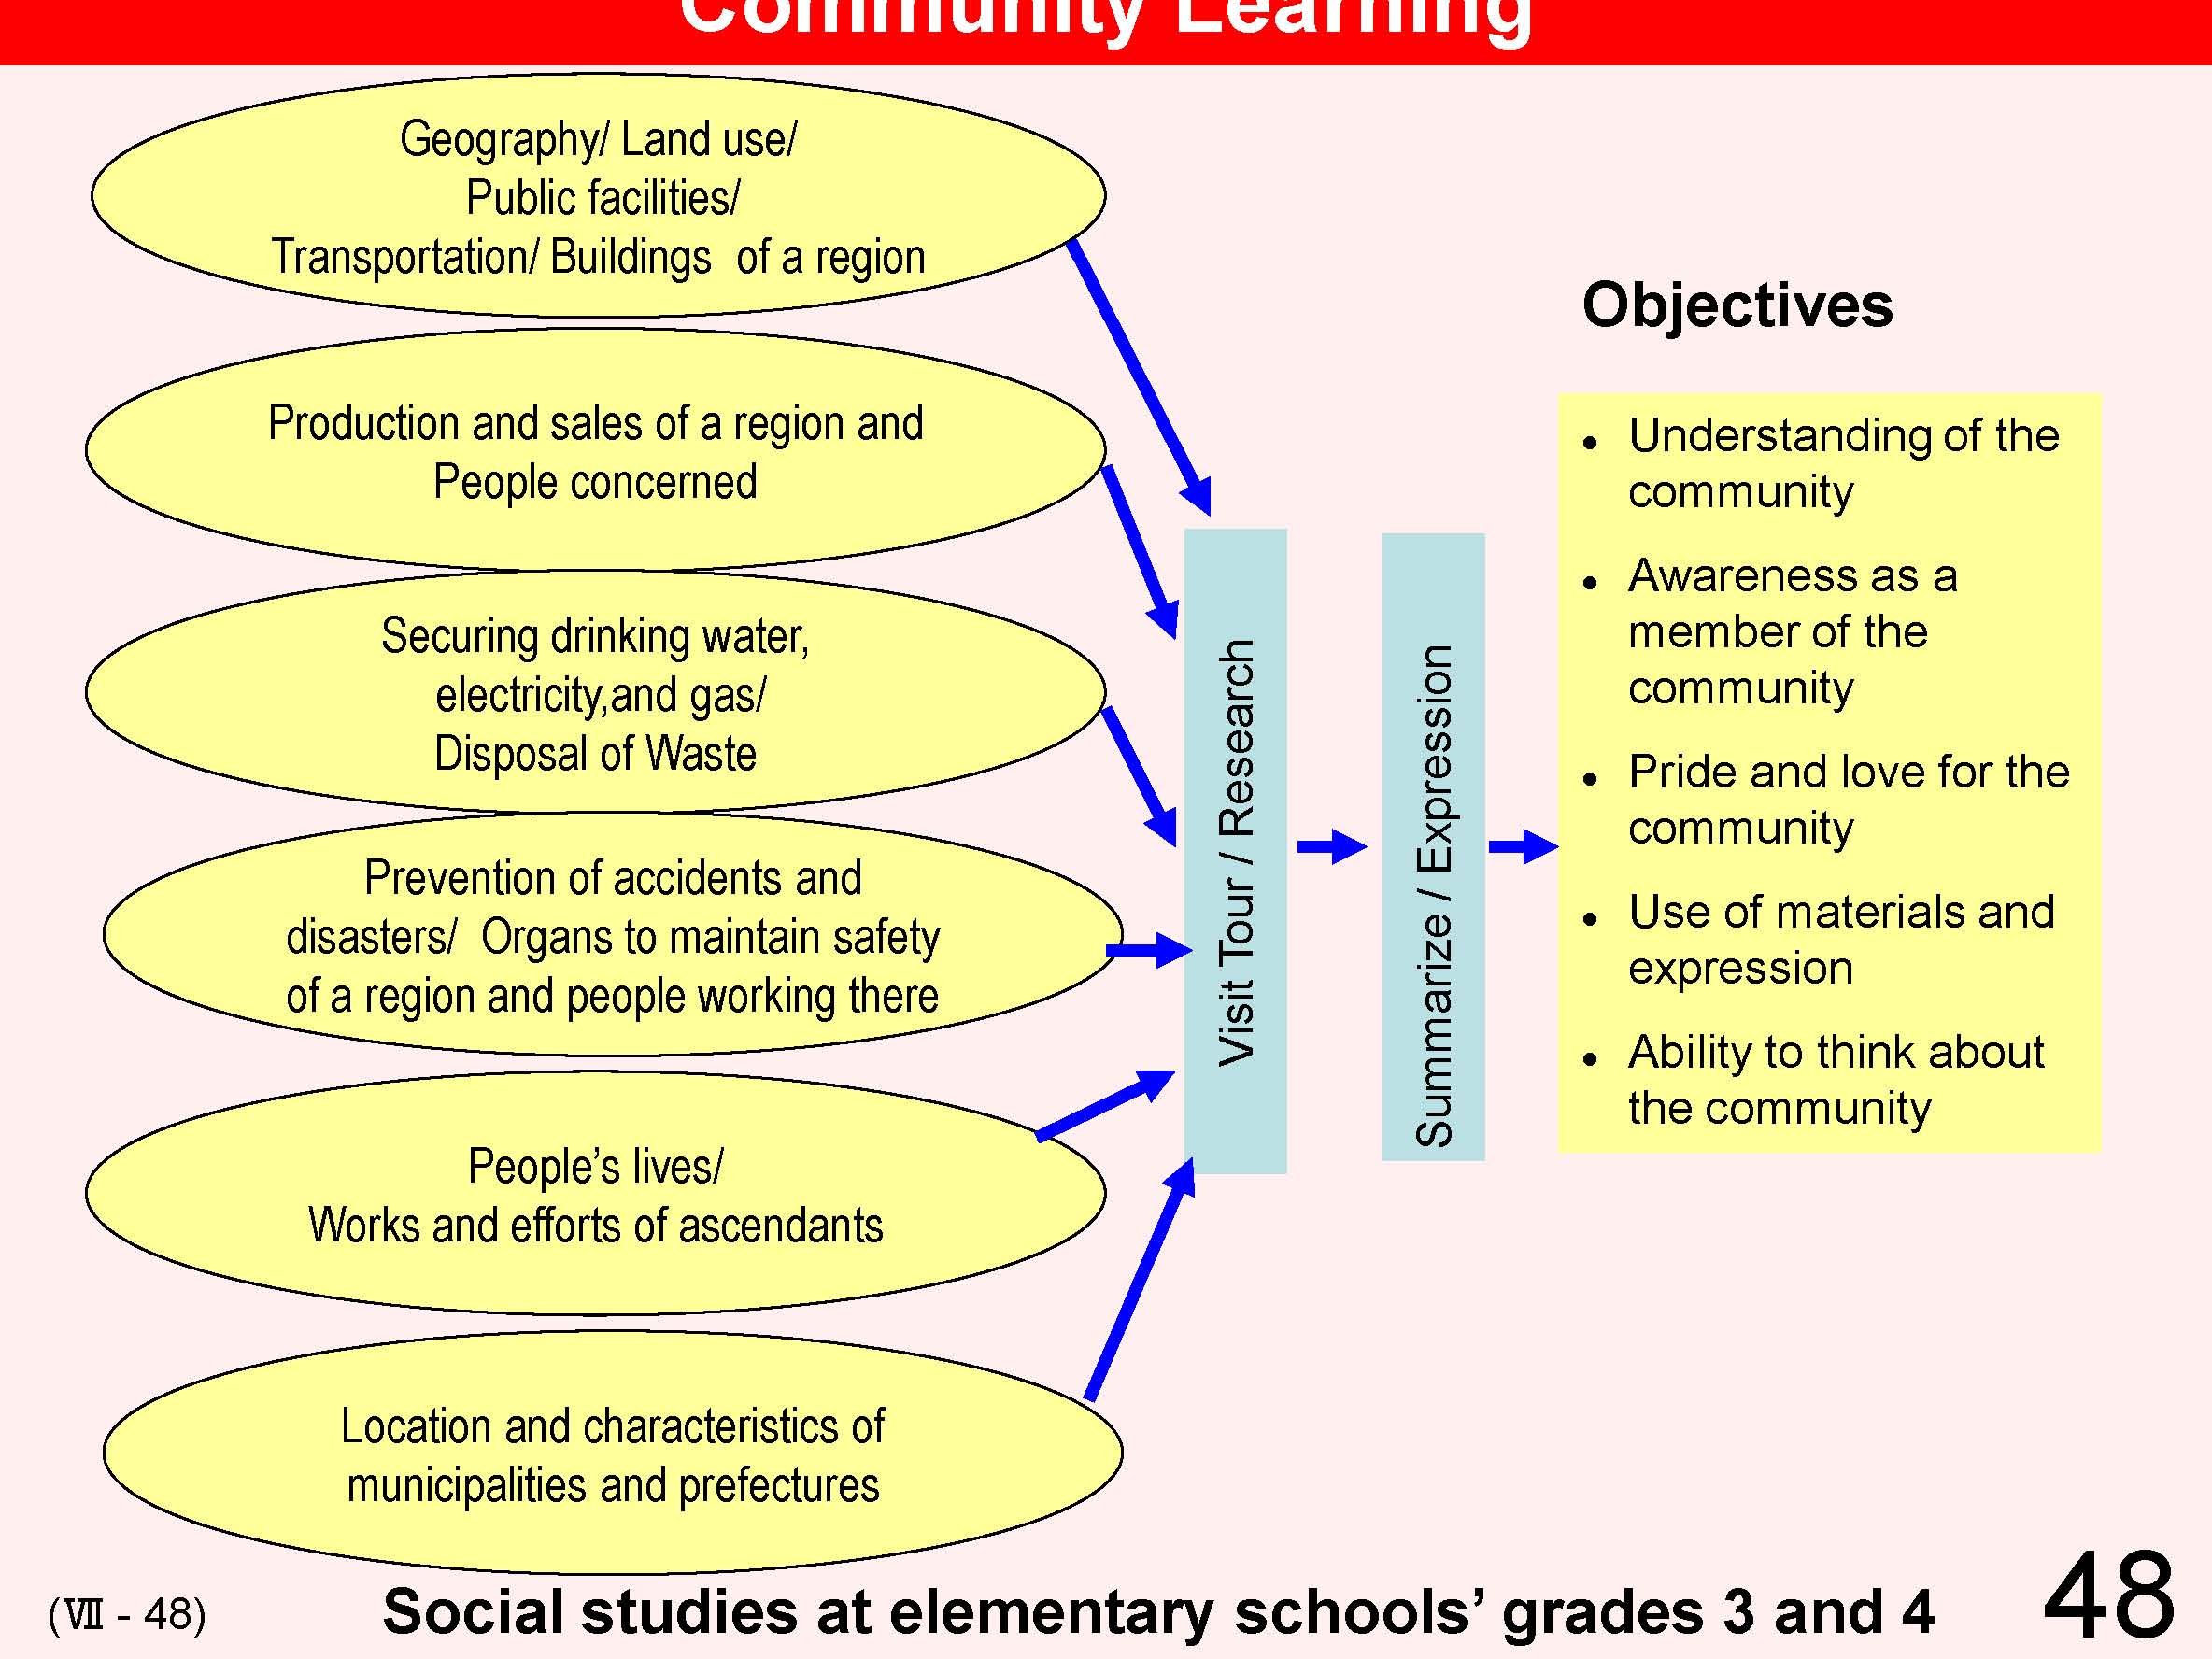 VII Cooperation between School and Local Community